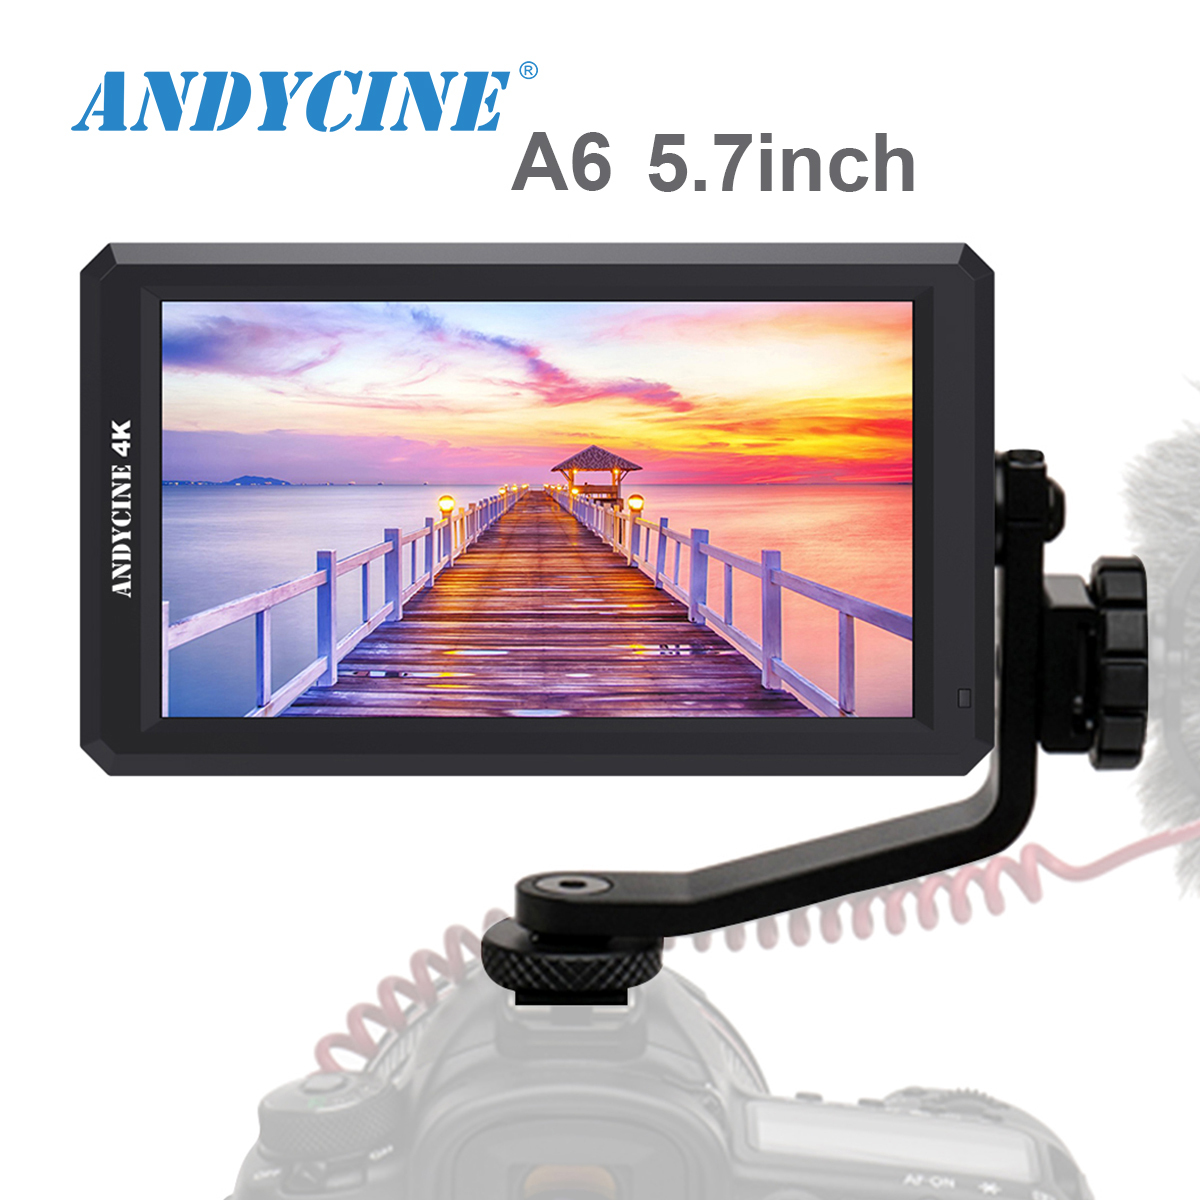 ANDYCINE A6 HDMI Field Monitor for Sony,Nikon,Canon DSLR and Gimbals